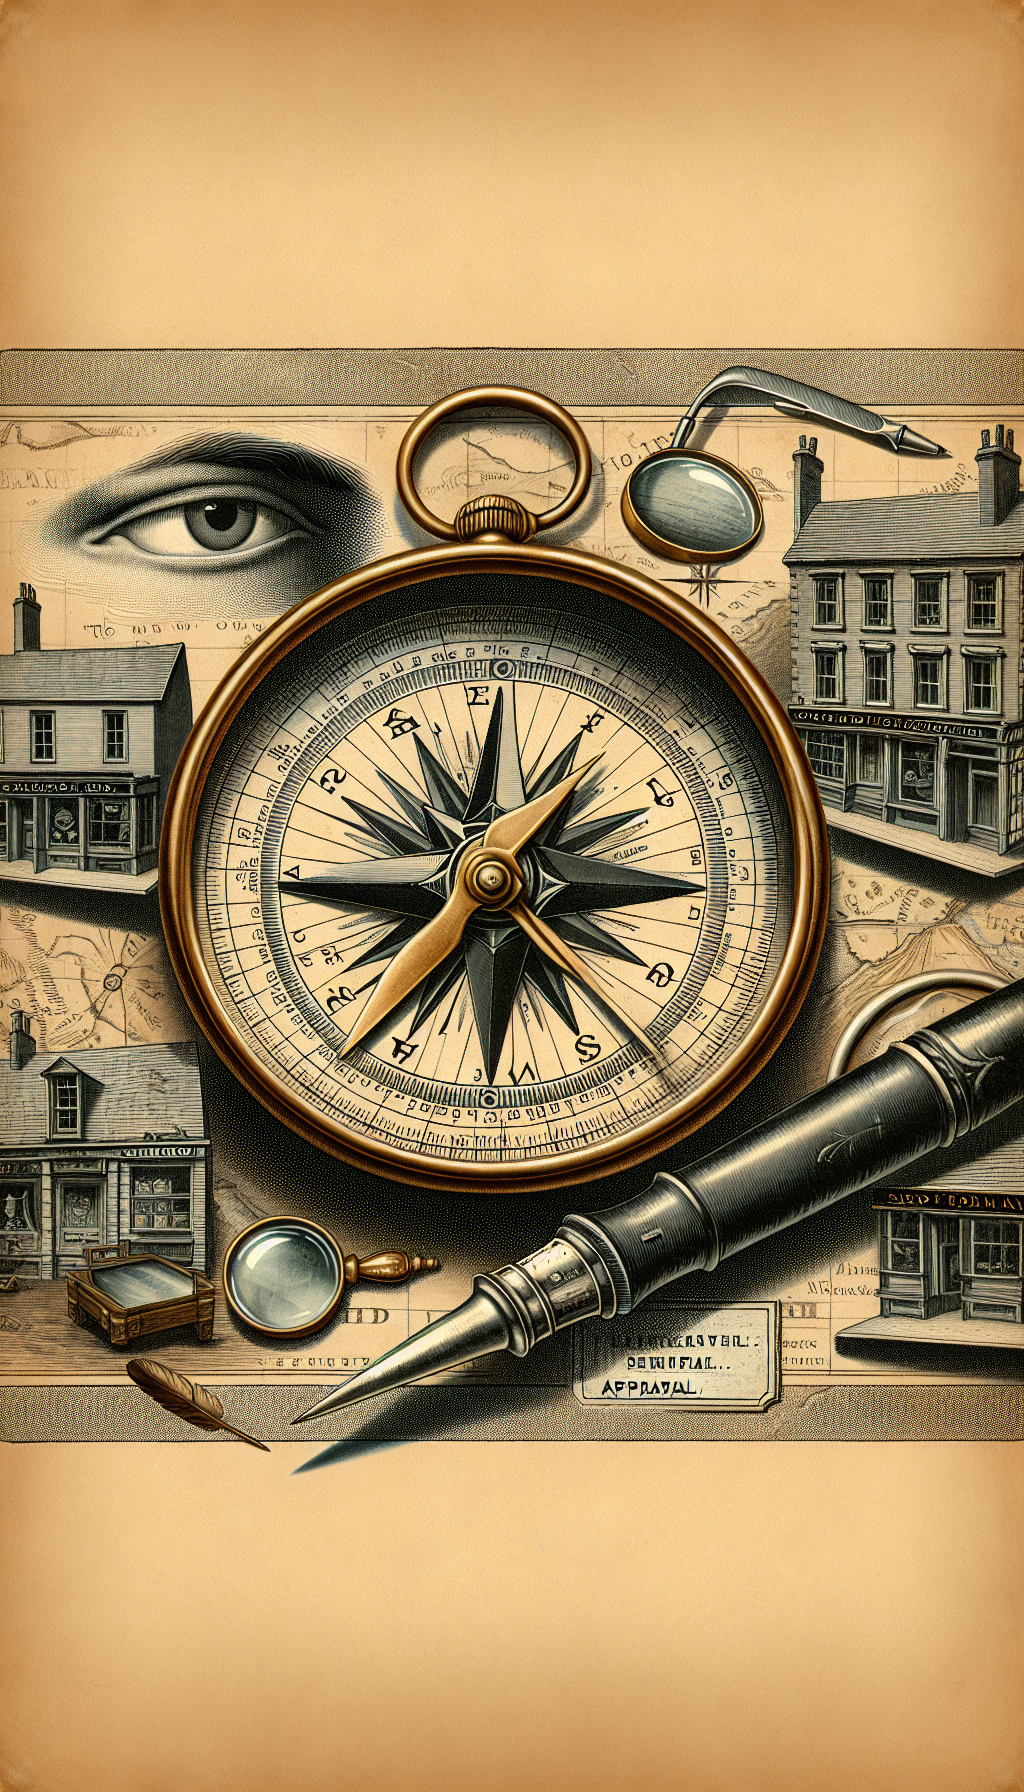 An illustration depicts an intricately detailed antique compass on an ancient map marked with magnifying glasses and quills, symbolizing appraisal. Near the edges, small vignettes contain local landmarks or storefronts with "Appraisal" signs, suggesting a quest for nearby experts. A pair of discerning eyes peers from behind the compass, embodying preparation and scrutiny for the appraisal journey.